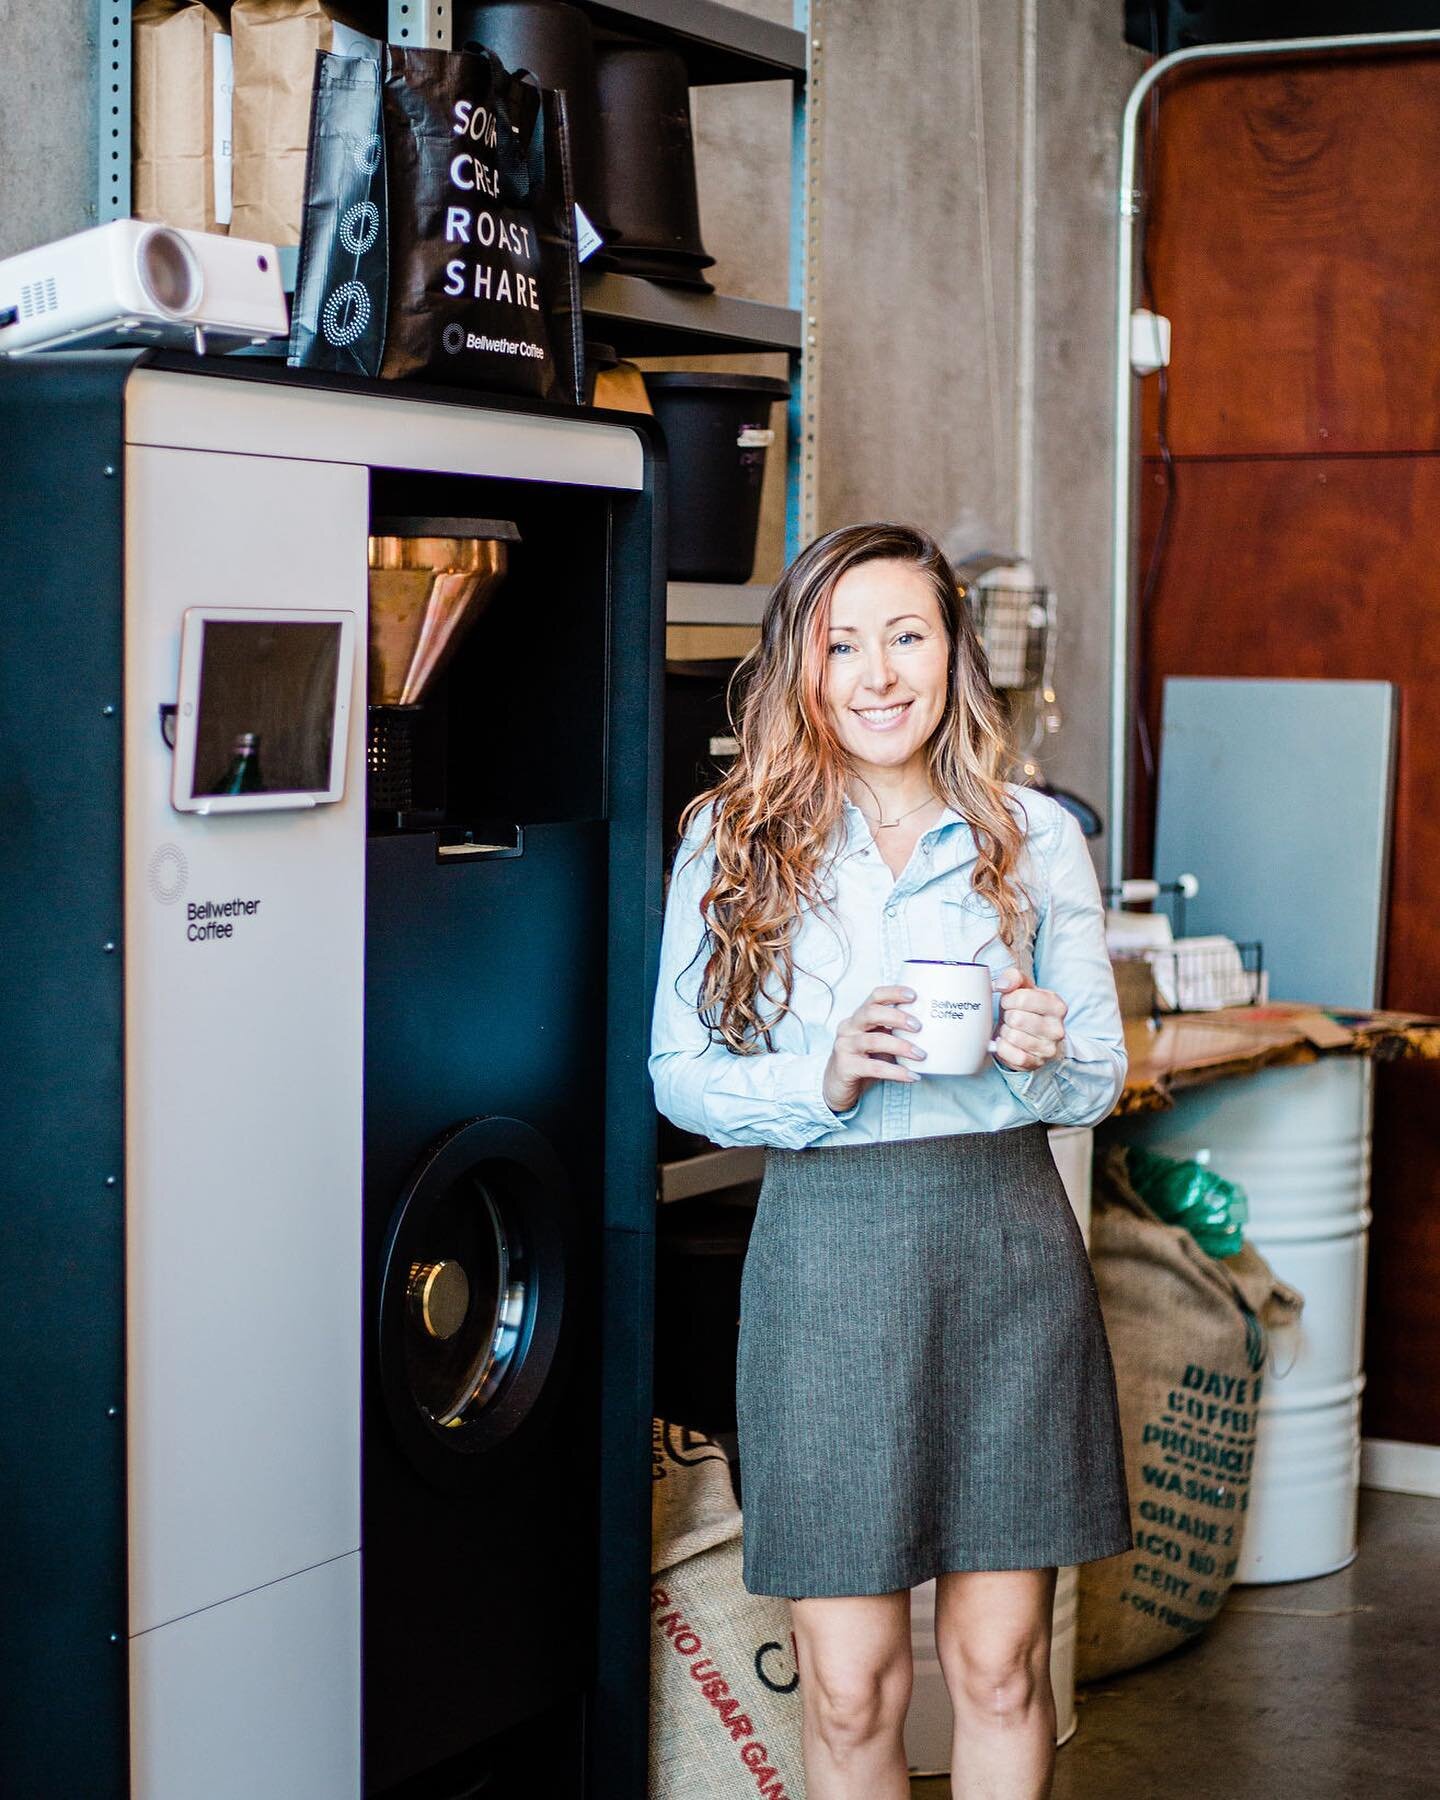 It&rsquo;s Earth Day!! 🌱

A perfect reason to spotlight our beloved zero emissions coffee roaster 🌎

It was 2019 and @bellwethercoffee had just won Best New Product at Boston&rsquo;s coffee expo. They invited us to California to see the machine in 